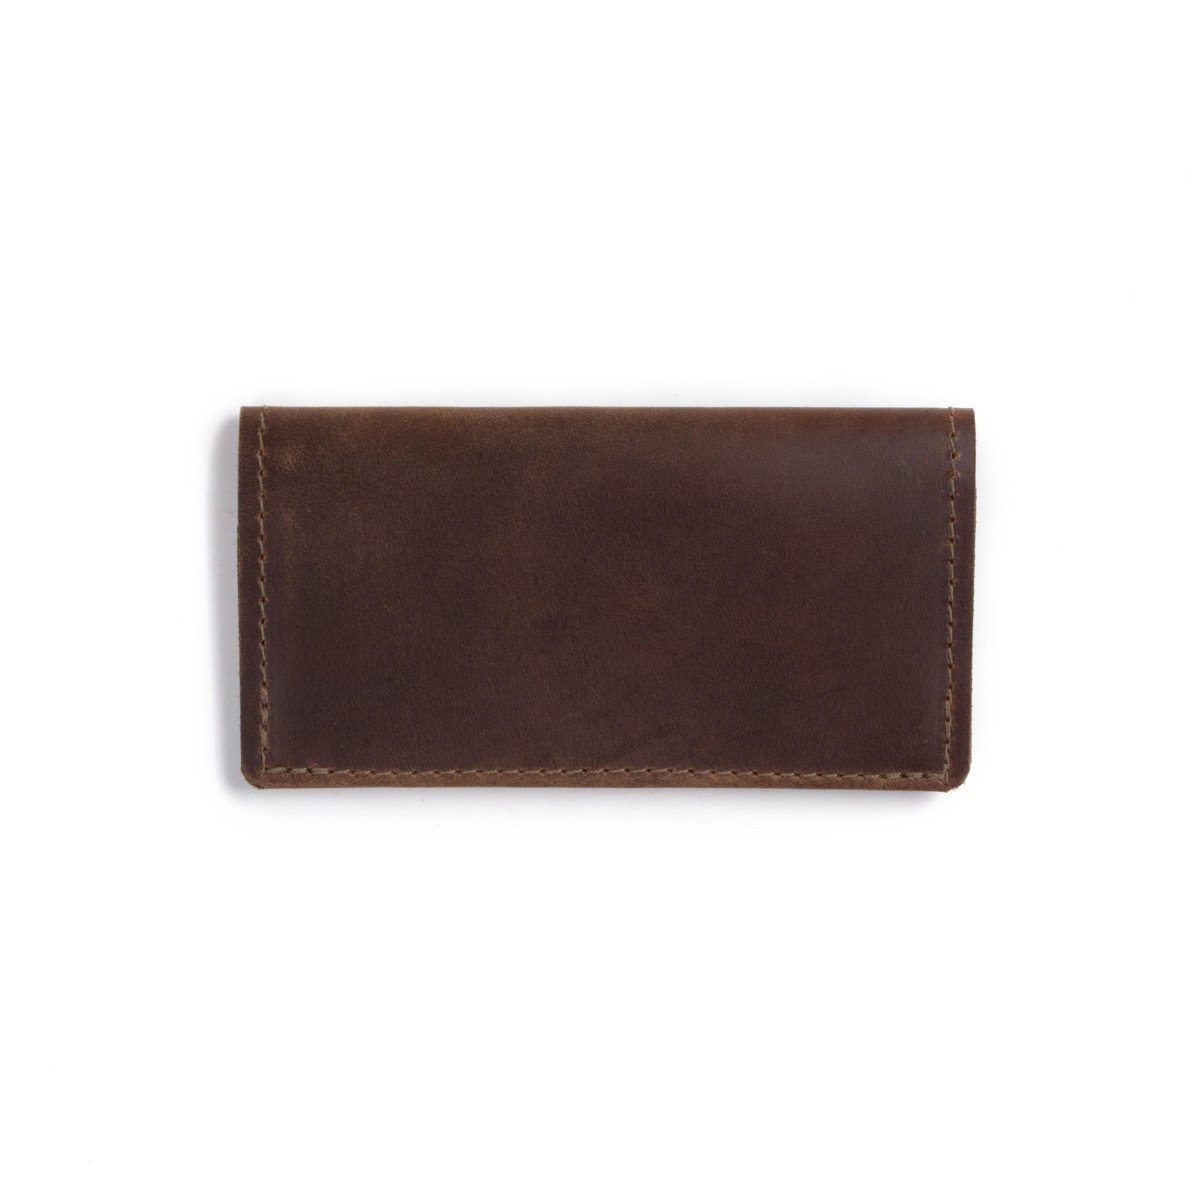 Leather Checkbook Cover browns